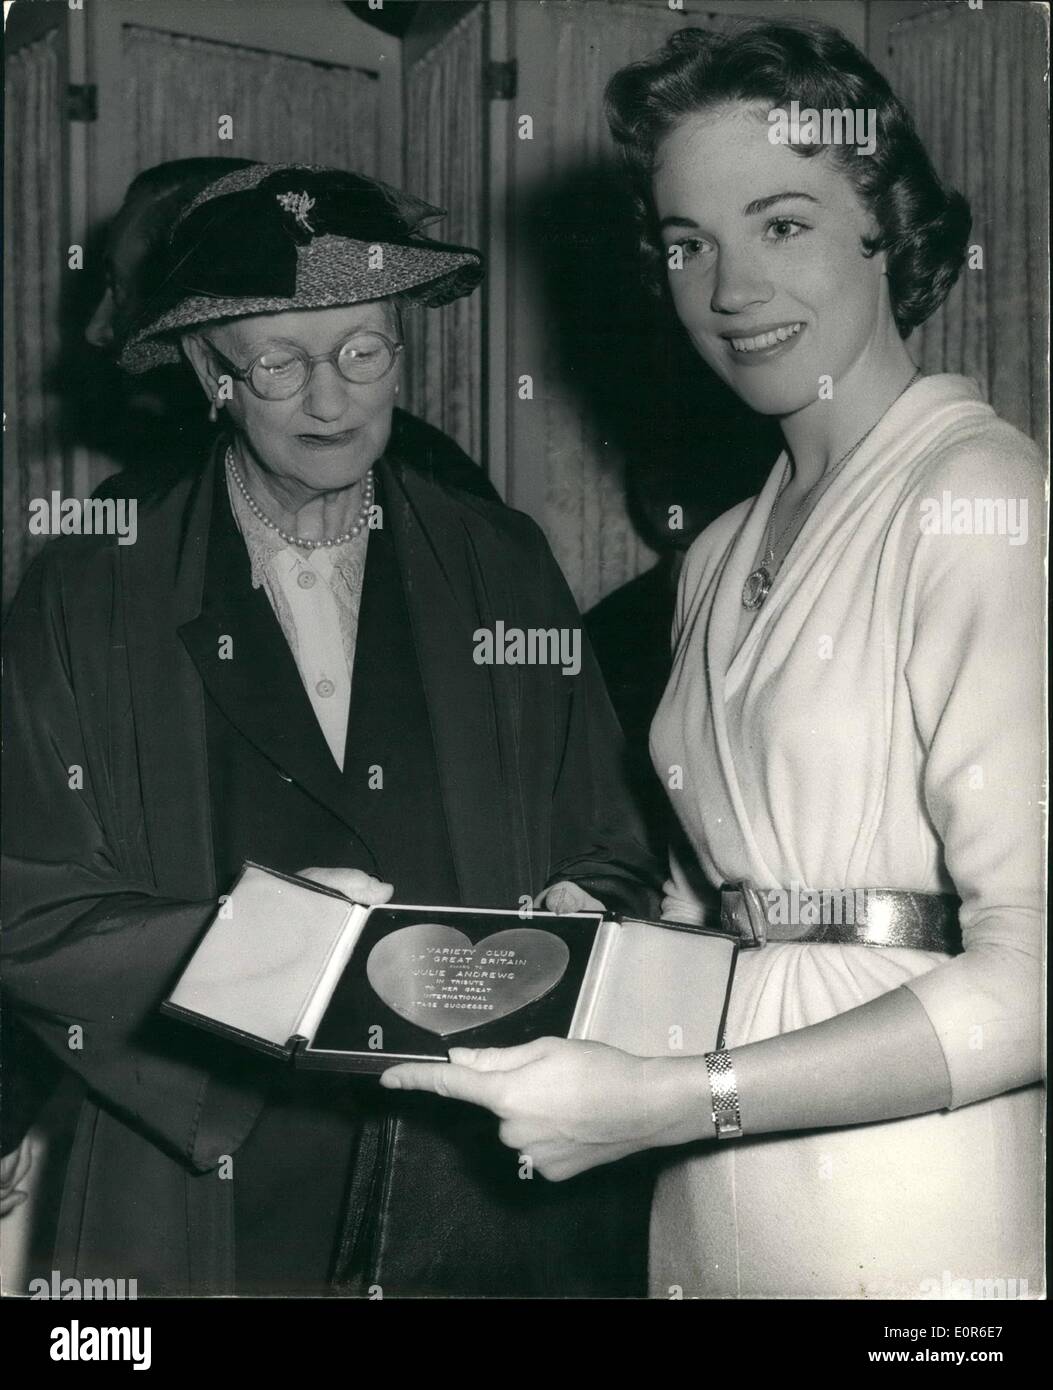 Jun. 06, 1958 - Variety Club Luncheon at Dorchester Hotel. Presentation of Silver Heart.: Guests of honour at the Variety Club of Great Britain Luncheon this afternoon. were Julia Andrews star of ''My Fair Lady'' - and Miss Blanche Patch - Secretary of the late George Bernard Shaw - author of ''Pygmalion'' on which the west End show is based. Miss Patch presented Miss Andrews with a Silver Hear as a trouble to her stage successes. Photo shows Miss Blanche Patch presents the silver heart to Miss Julie Andrews this afternoon. Stock Photo